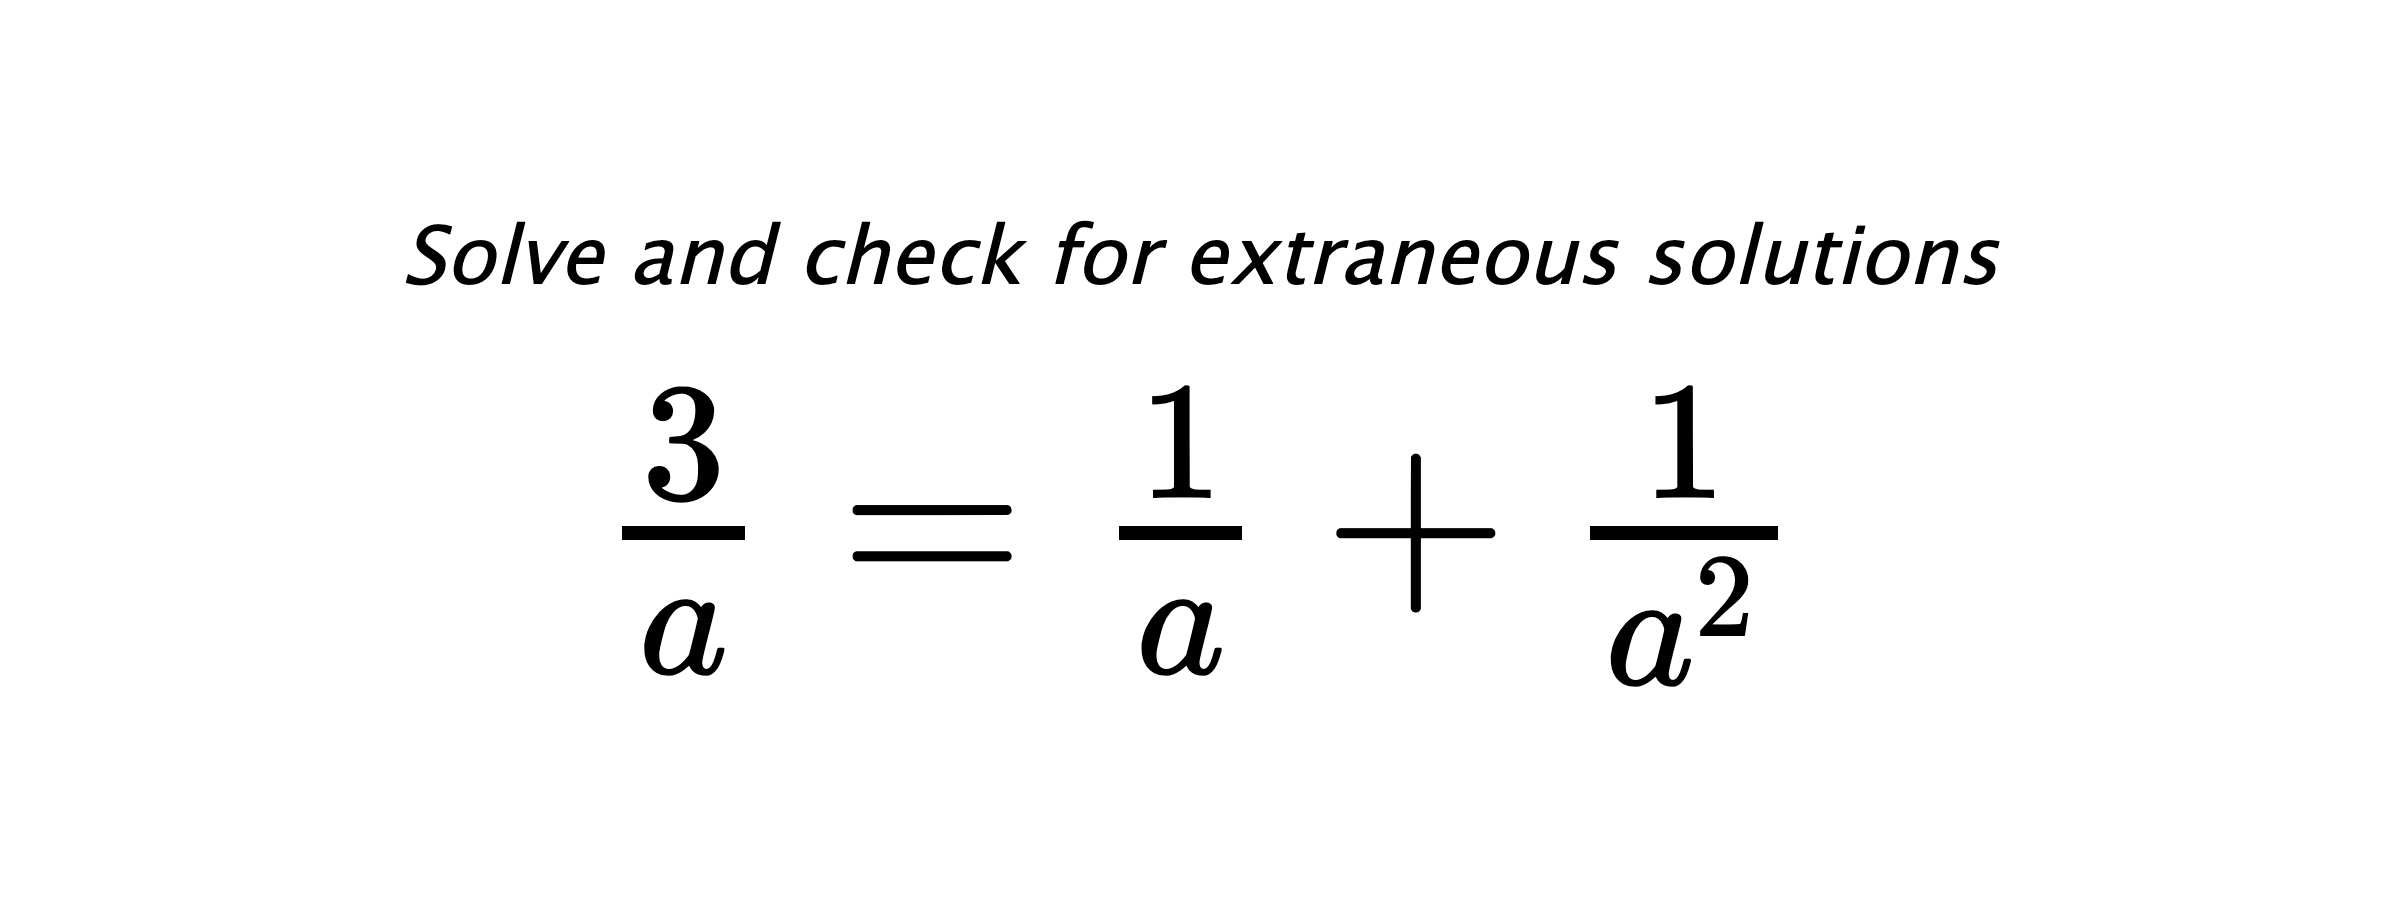 Solve and check for extraneous solutions $ \frac{3}{a}=\frac{1}{a}+\frac{1}{a^2} $